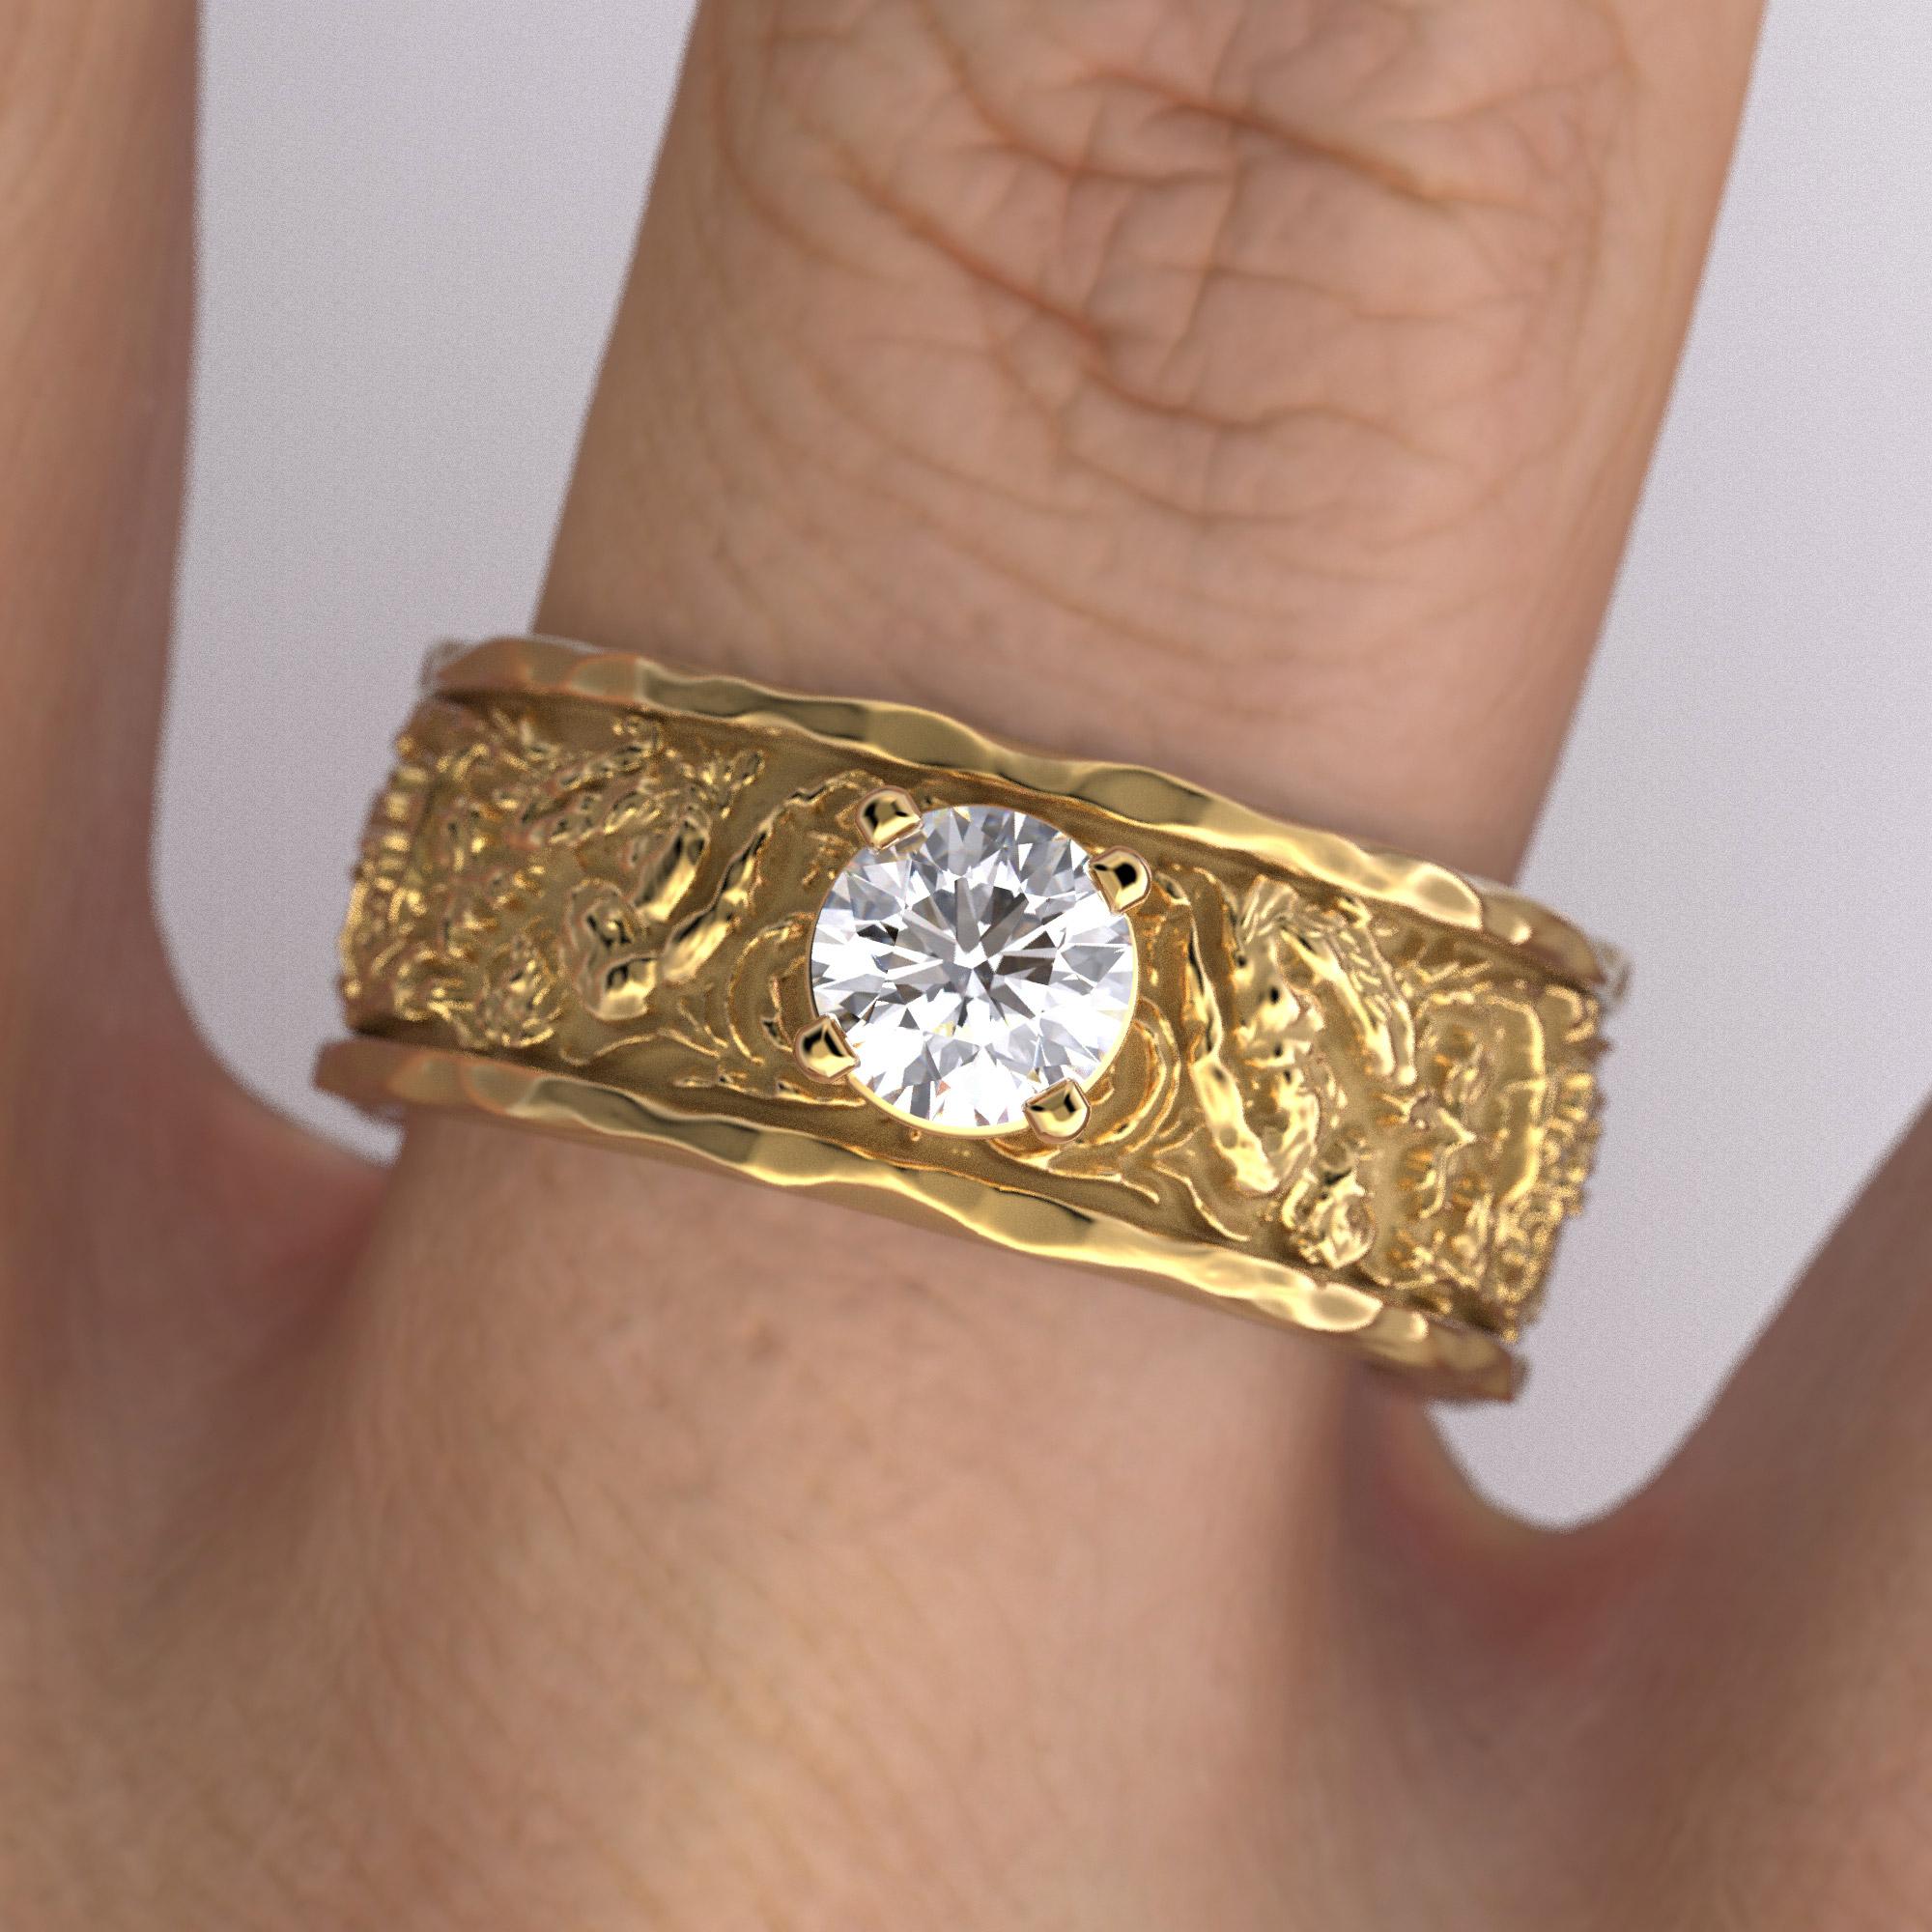 For Sale:  Half Carat Diamond Men's Gold Band in 14k Gold, Designed and Crafted in Italy 9